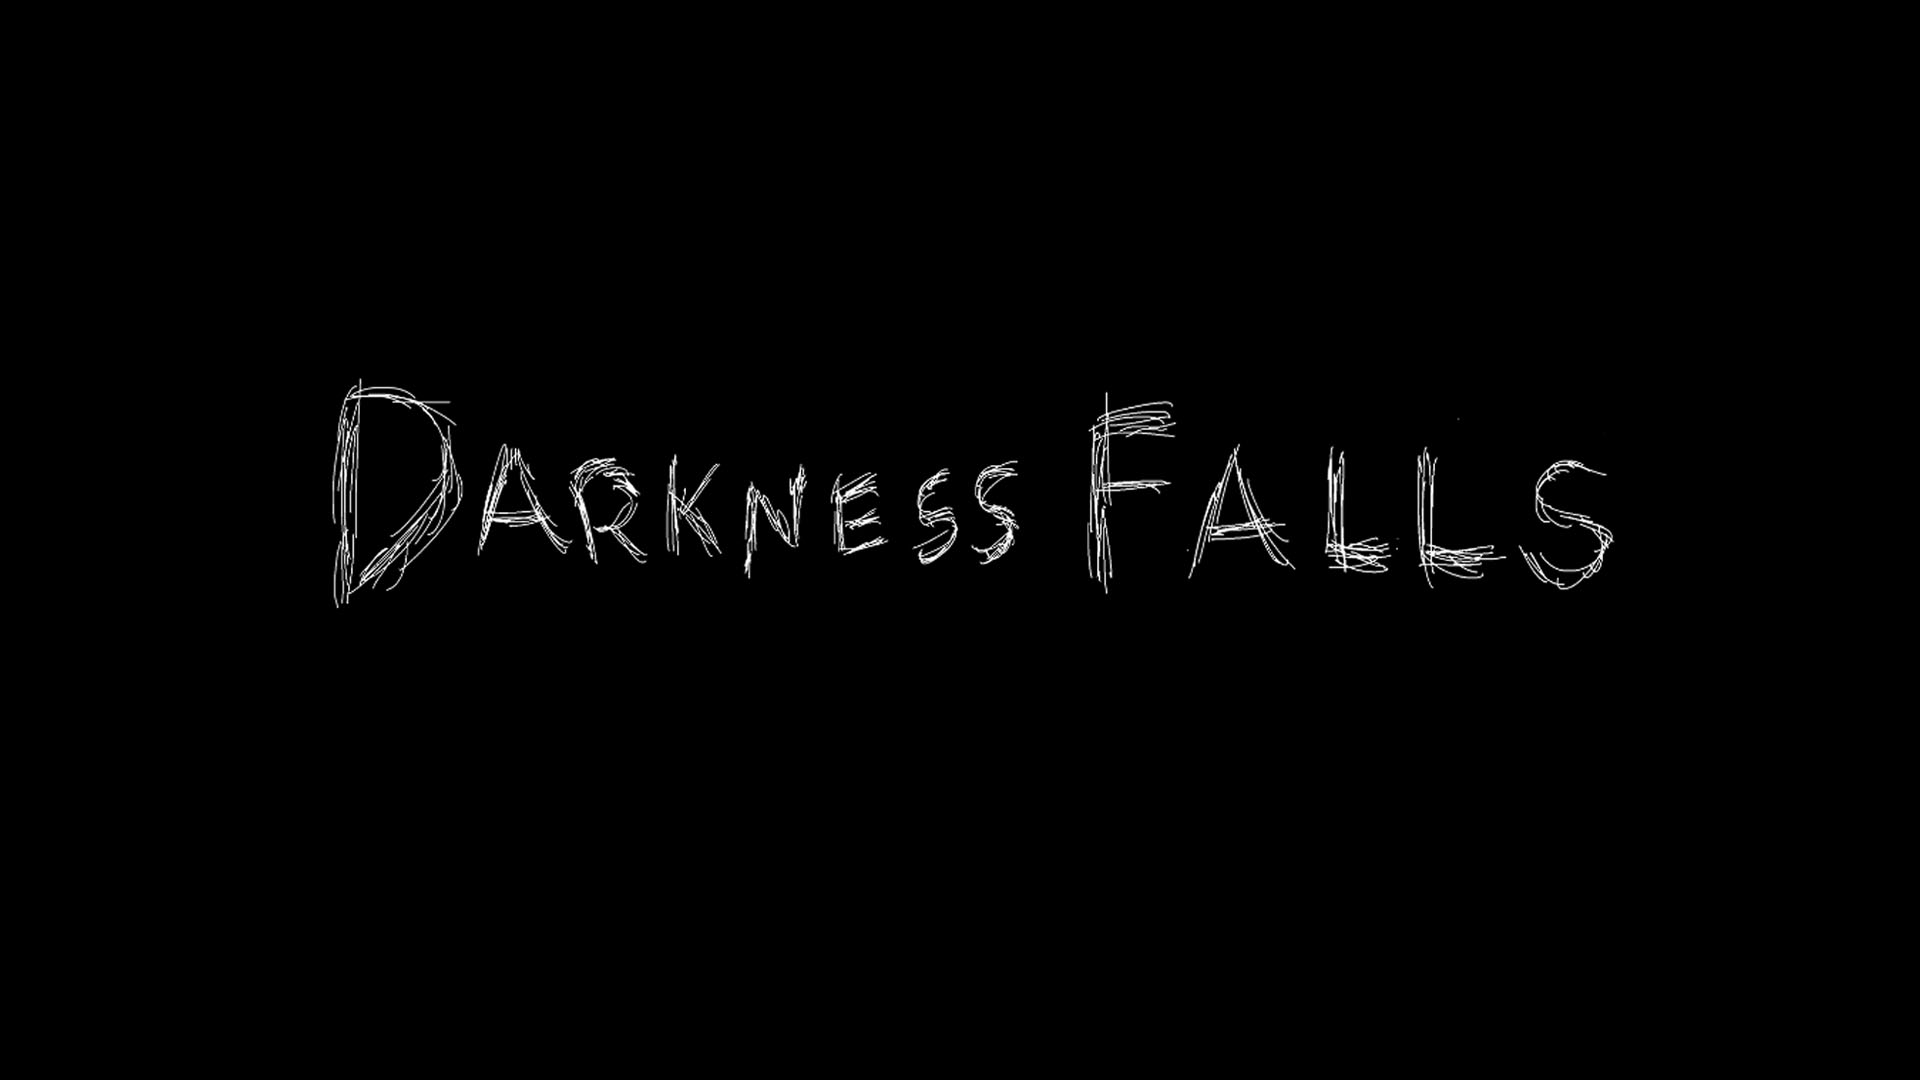 Darkness Falls - The Game by Digimage